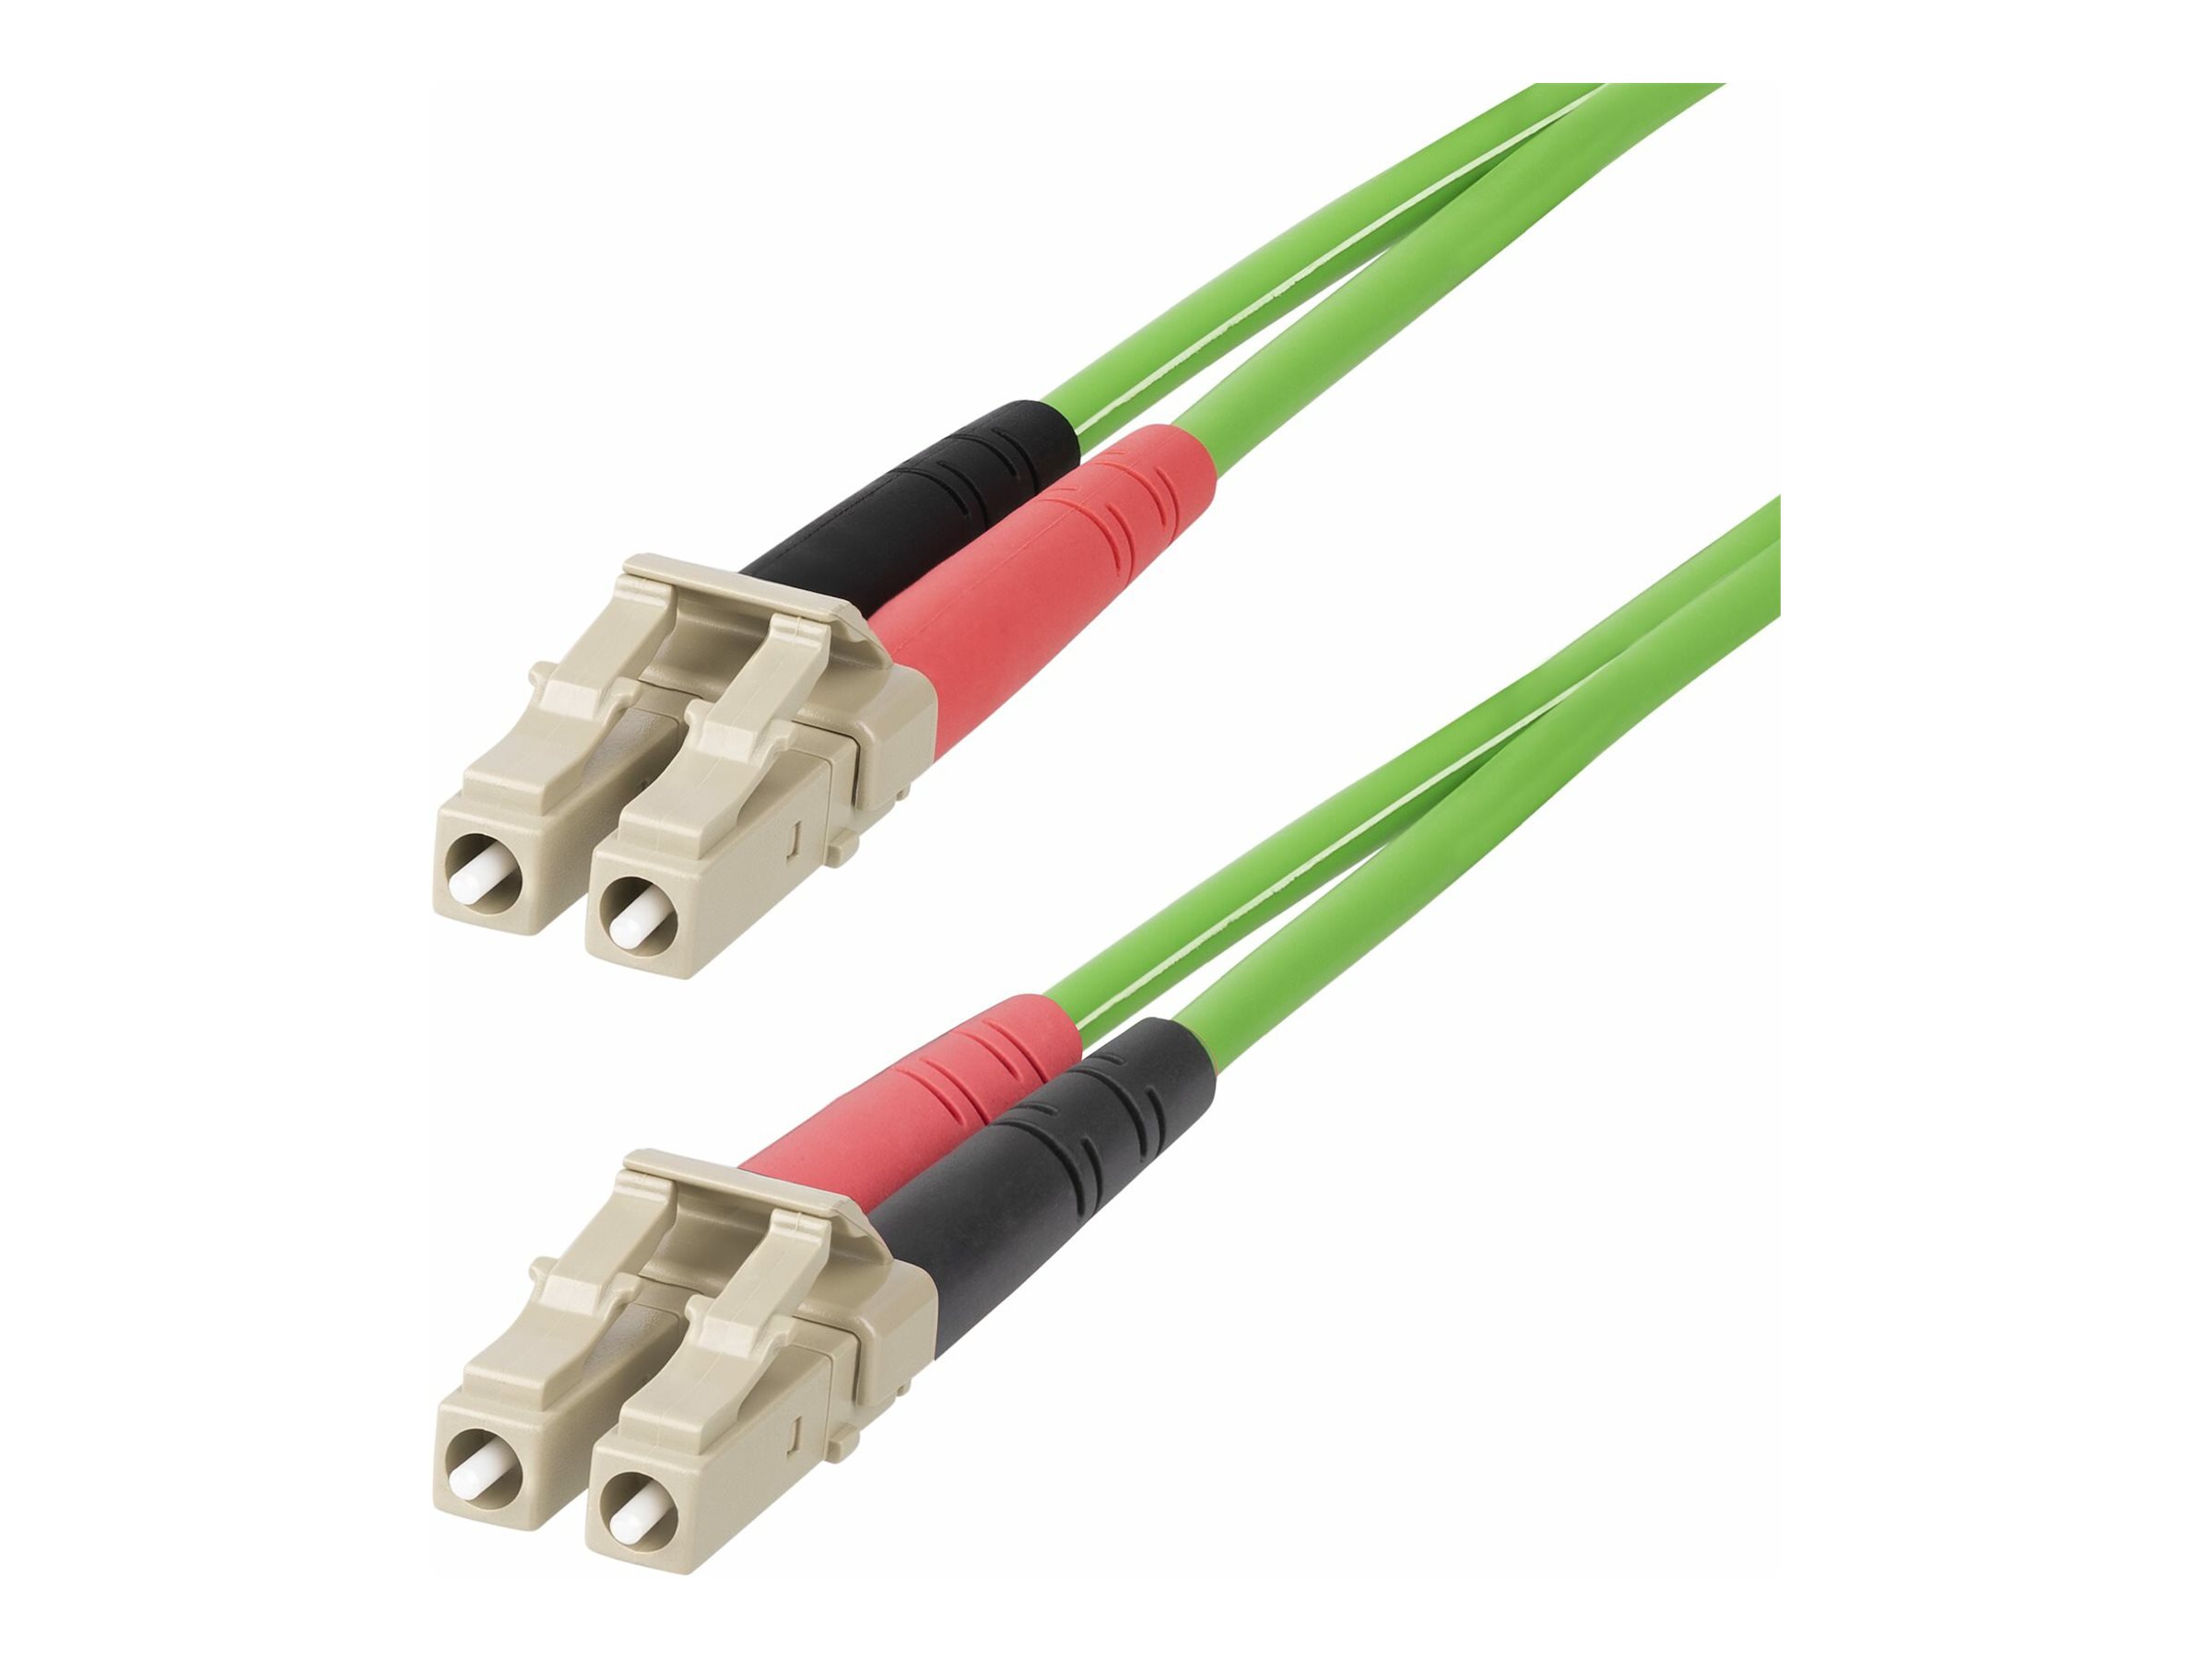 StarTech.com 15m (50ft) LC to LC (UPC) OM5 Multimode Fiber Optic Cable, 50/125m Duplex LOMMF Zipcord, VCSEL, 40G/100G, Bend Ins